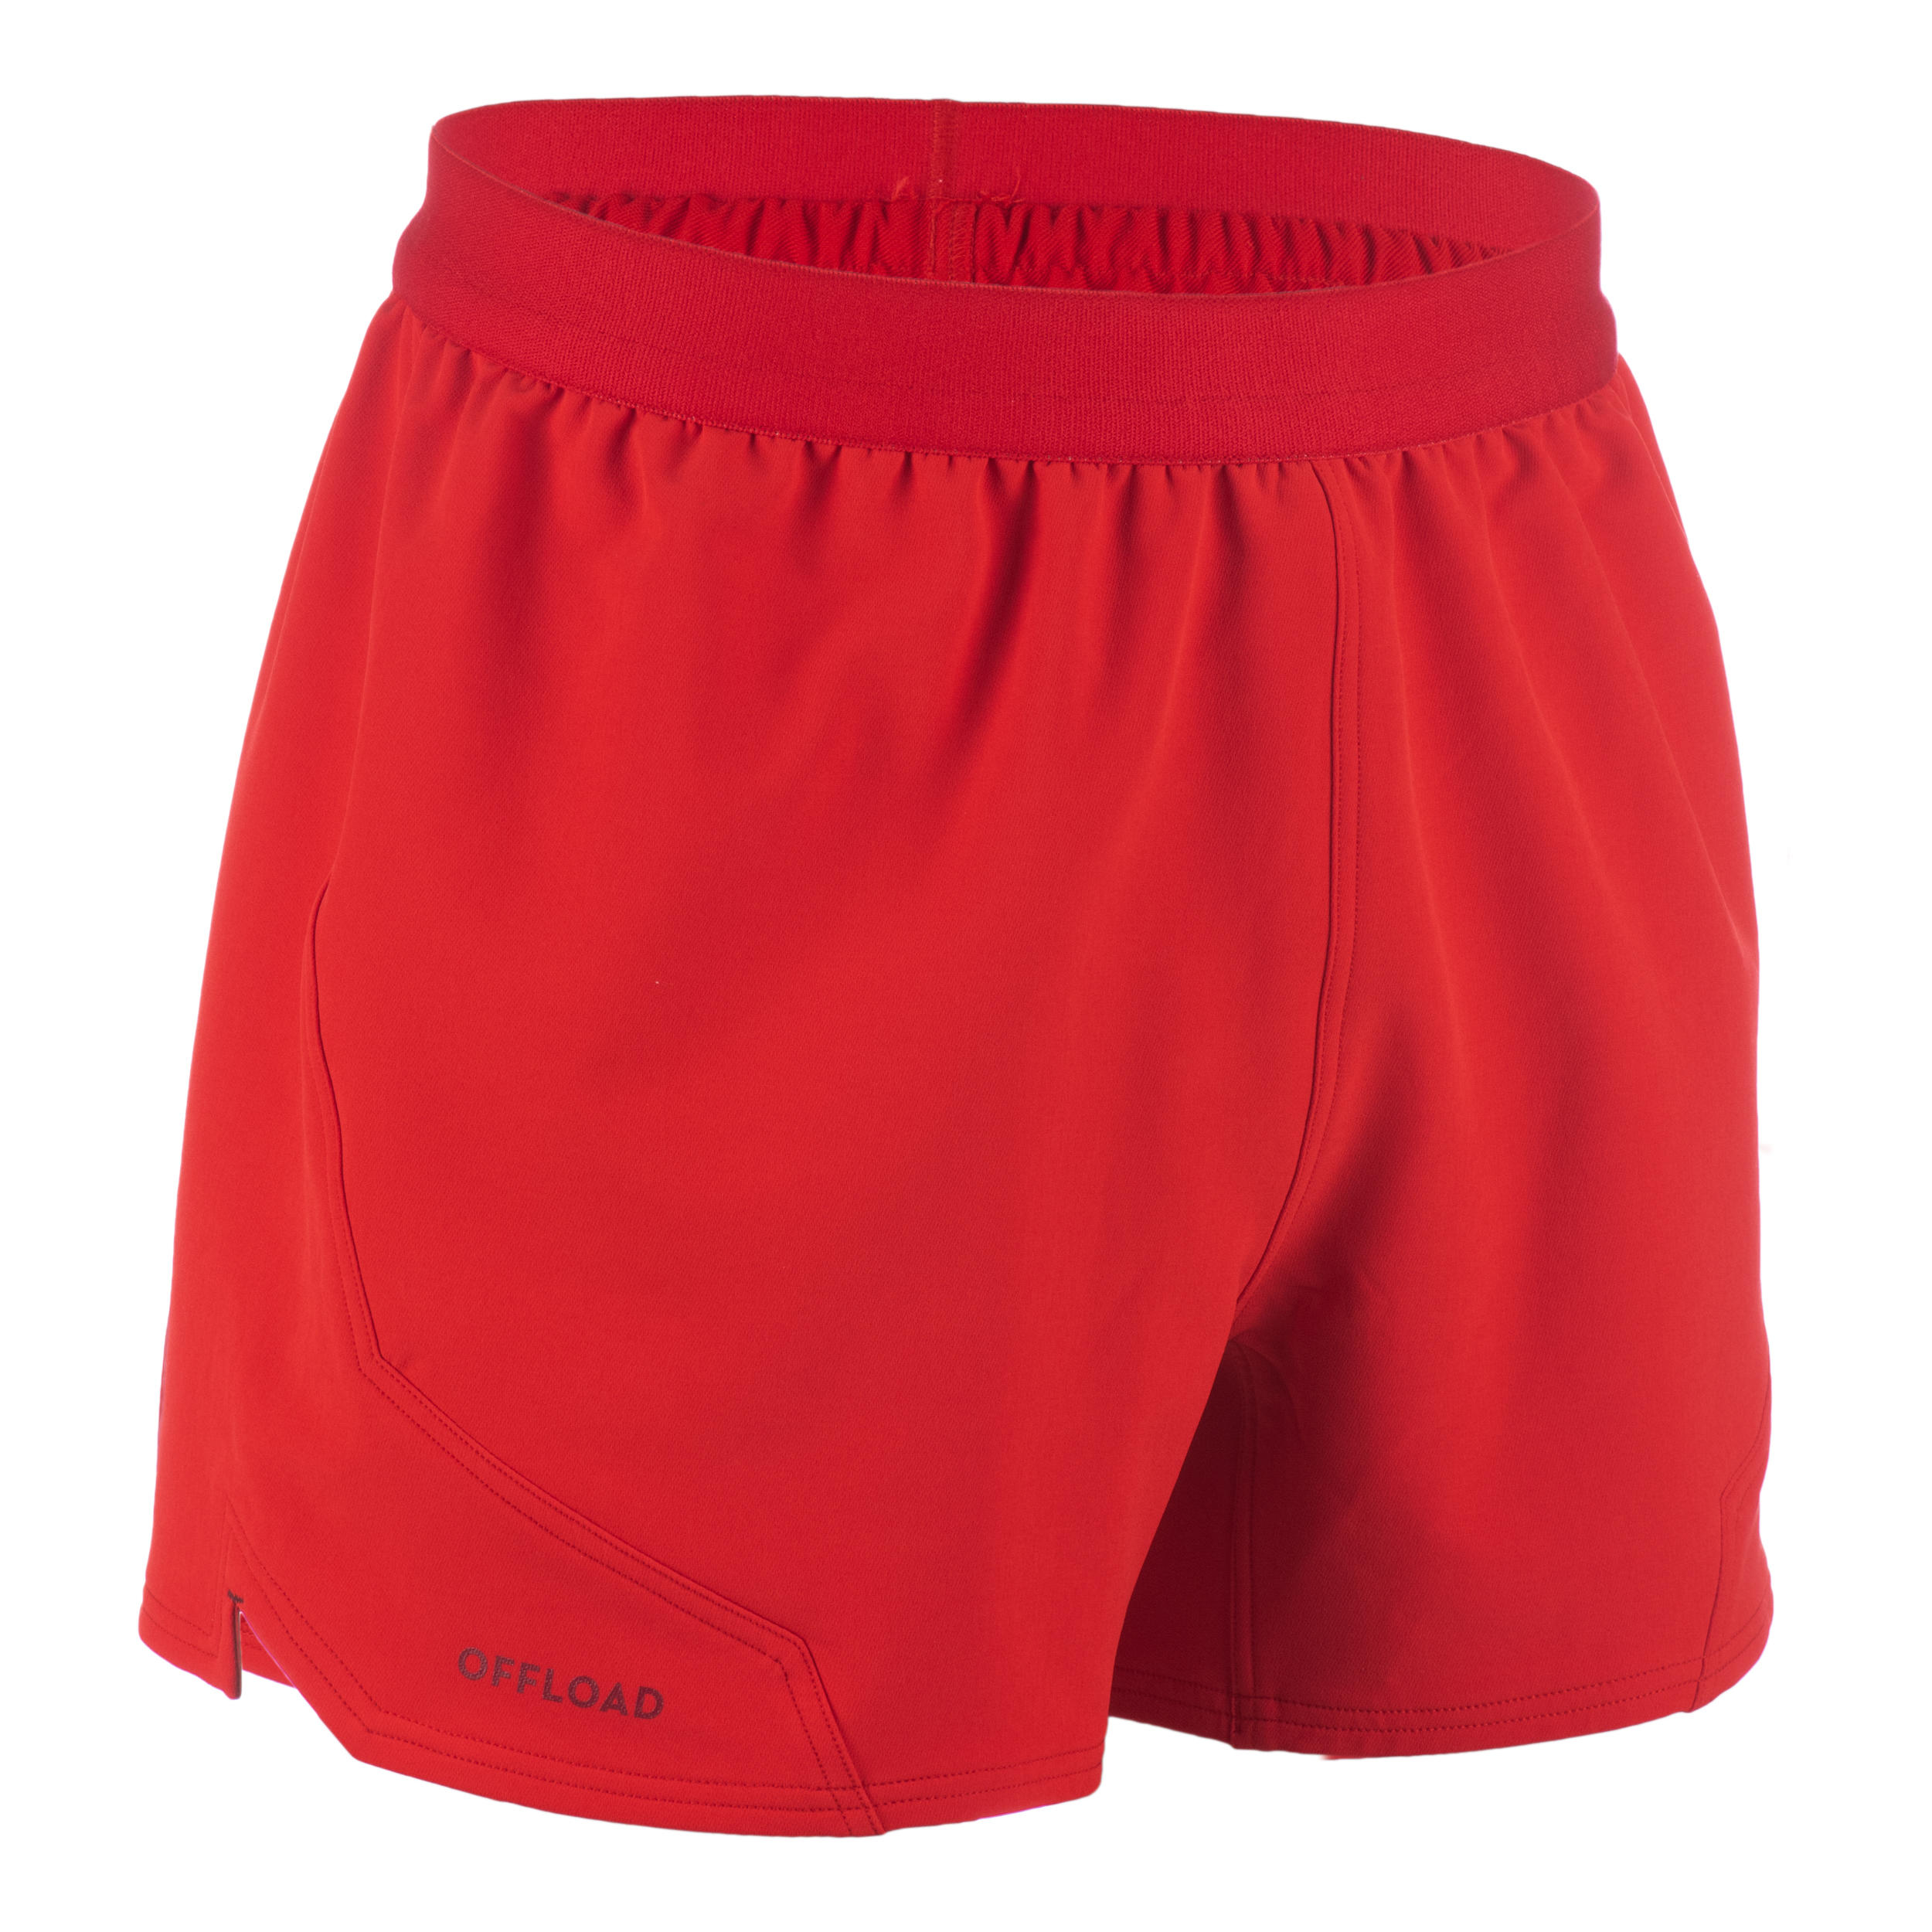 Men’s Rugby Shorts R500 - Red 1/9